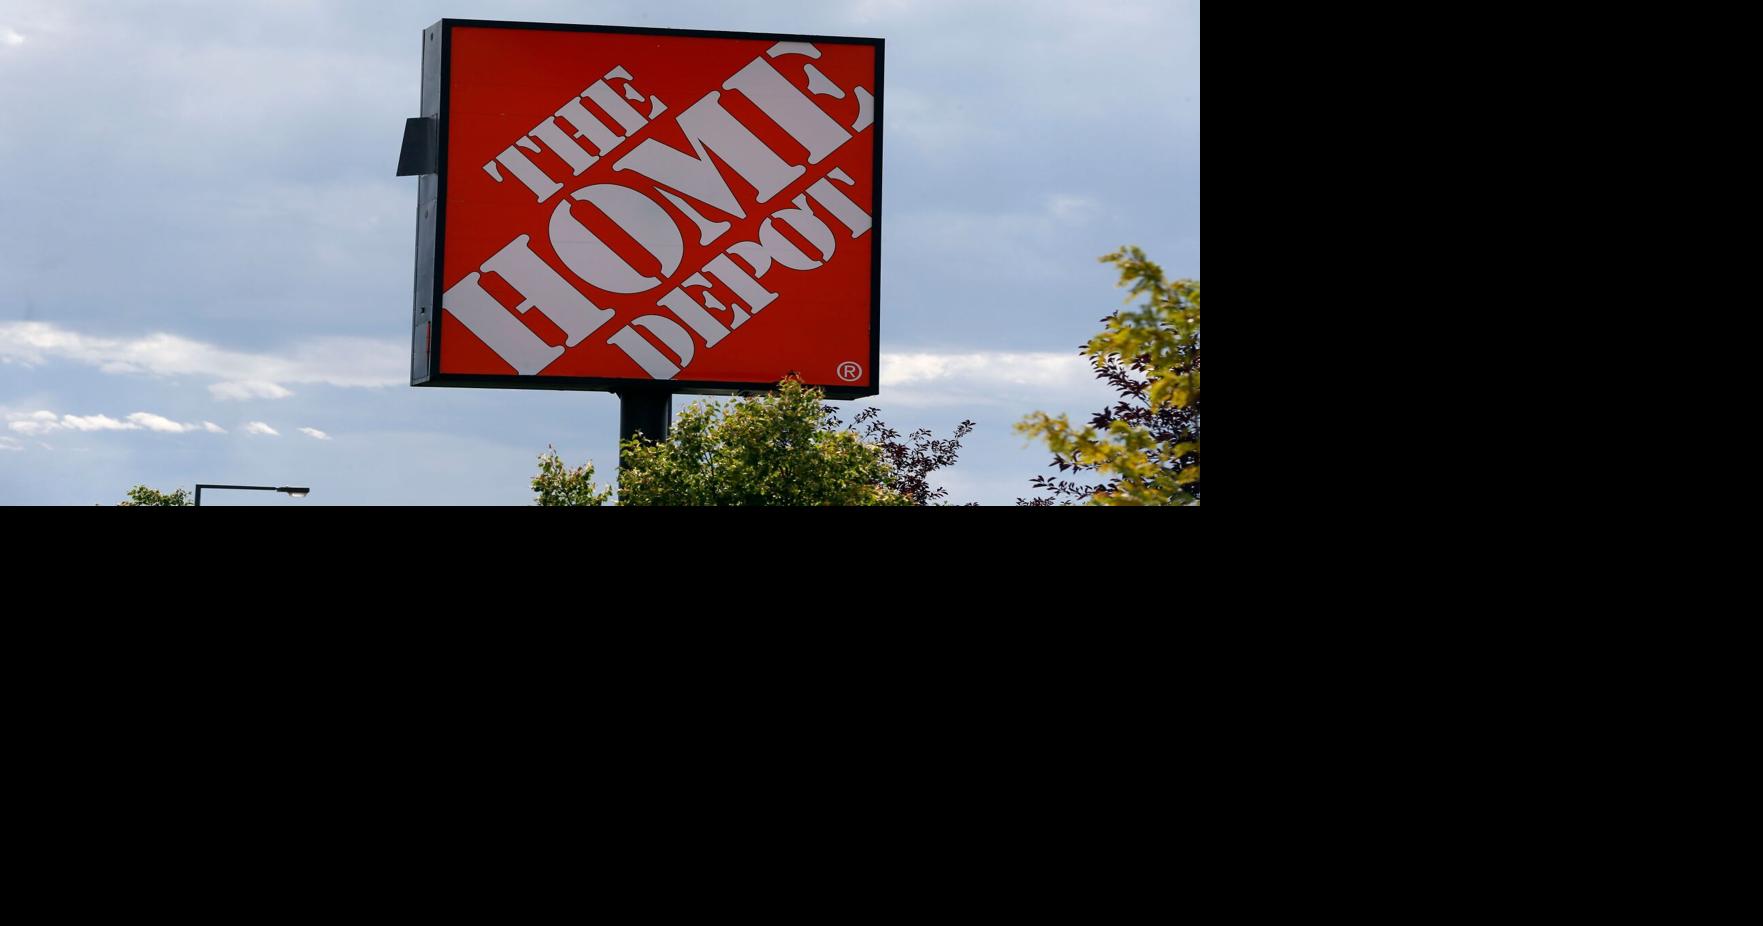 Home Depot broke labor law by firing an employee with 'BLM' on apron, NLRB  rules